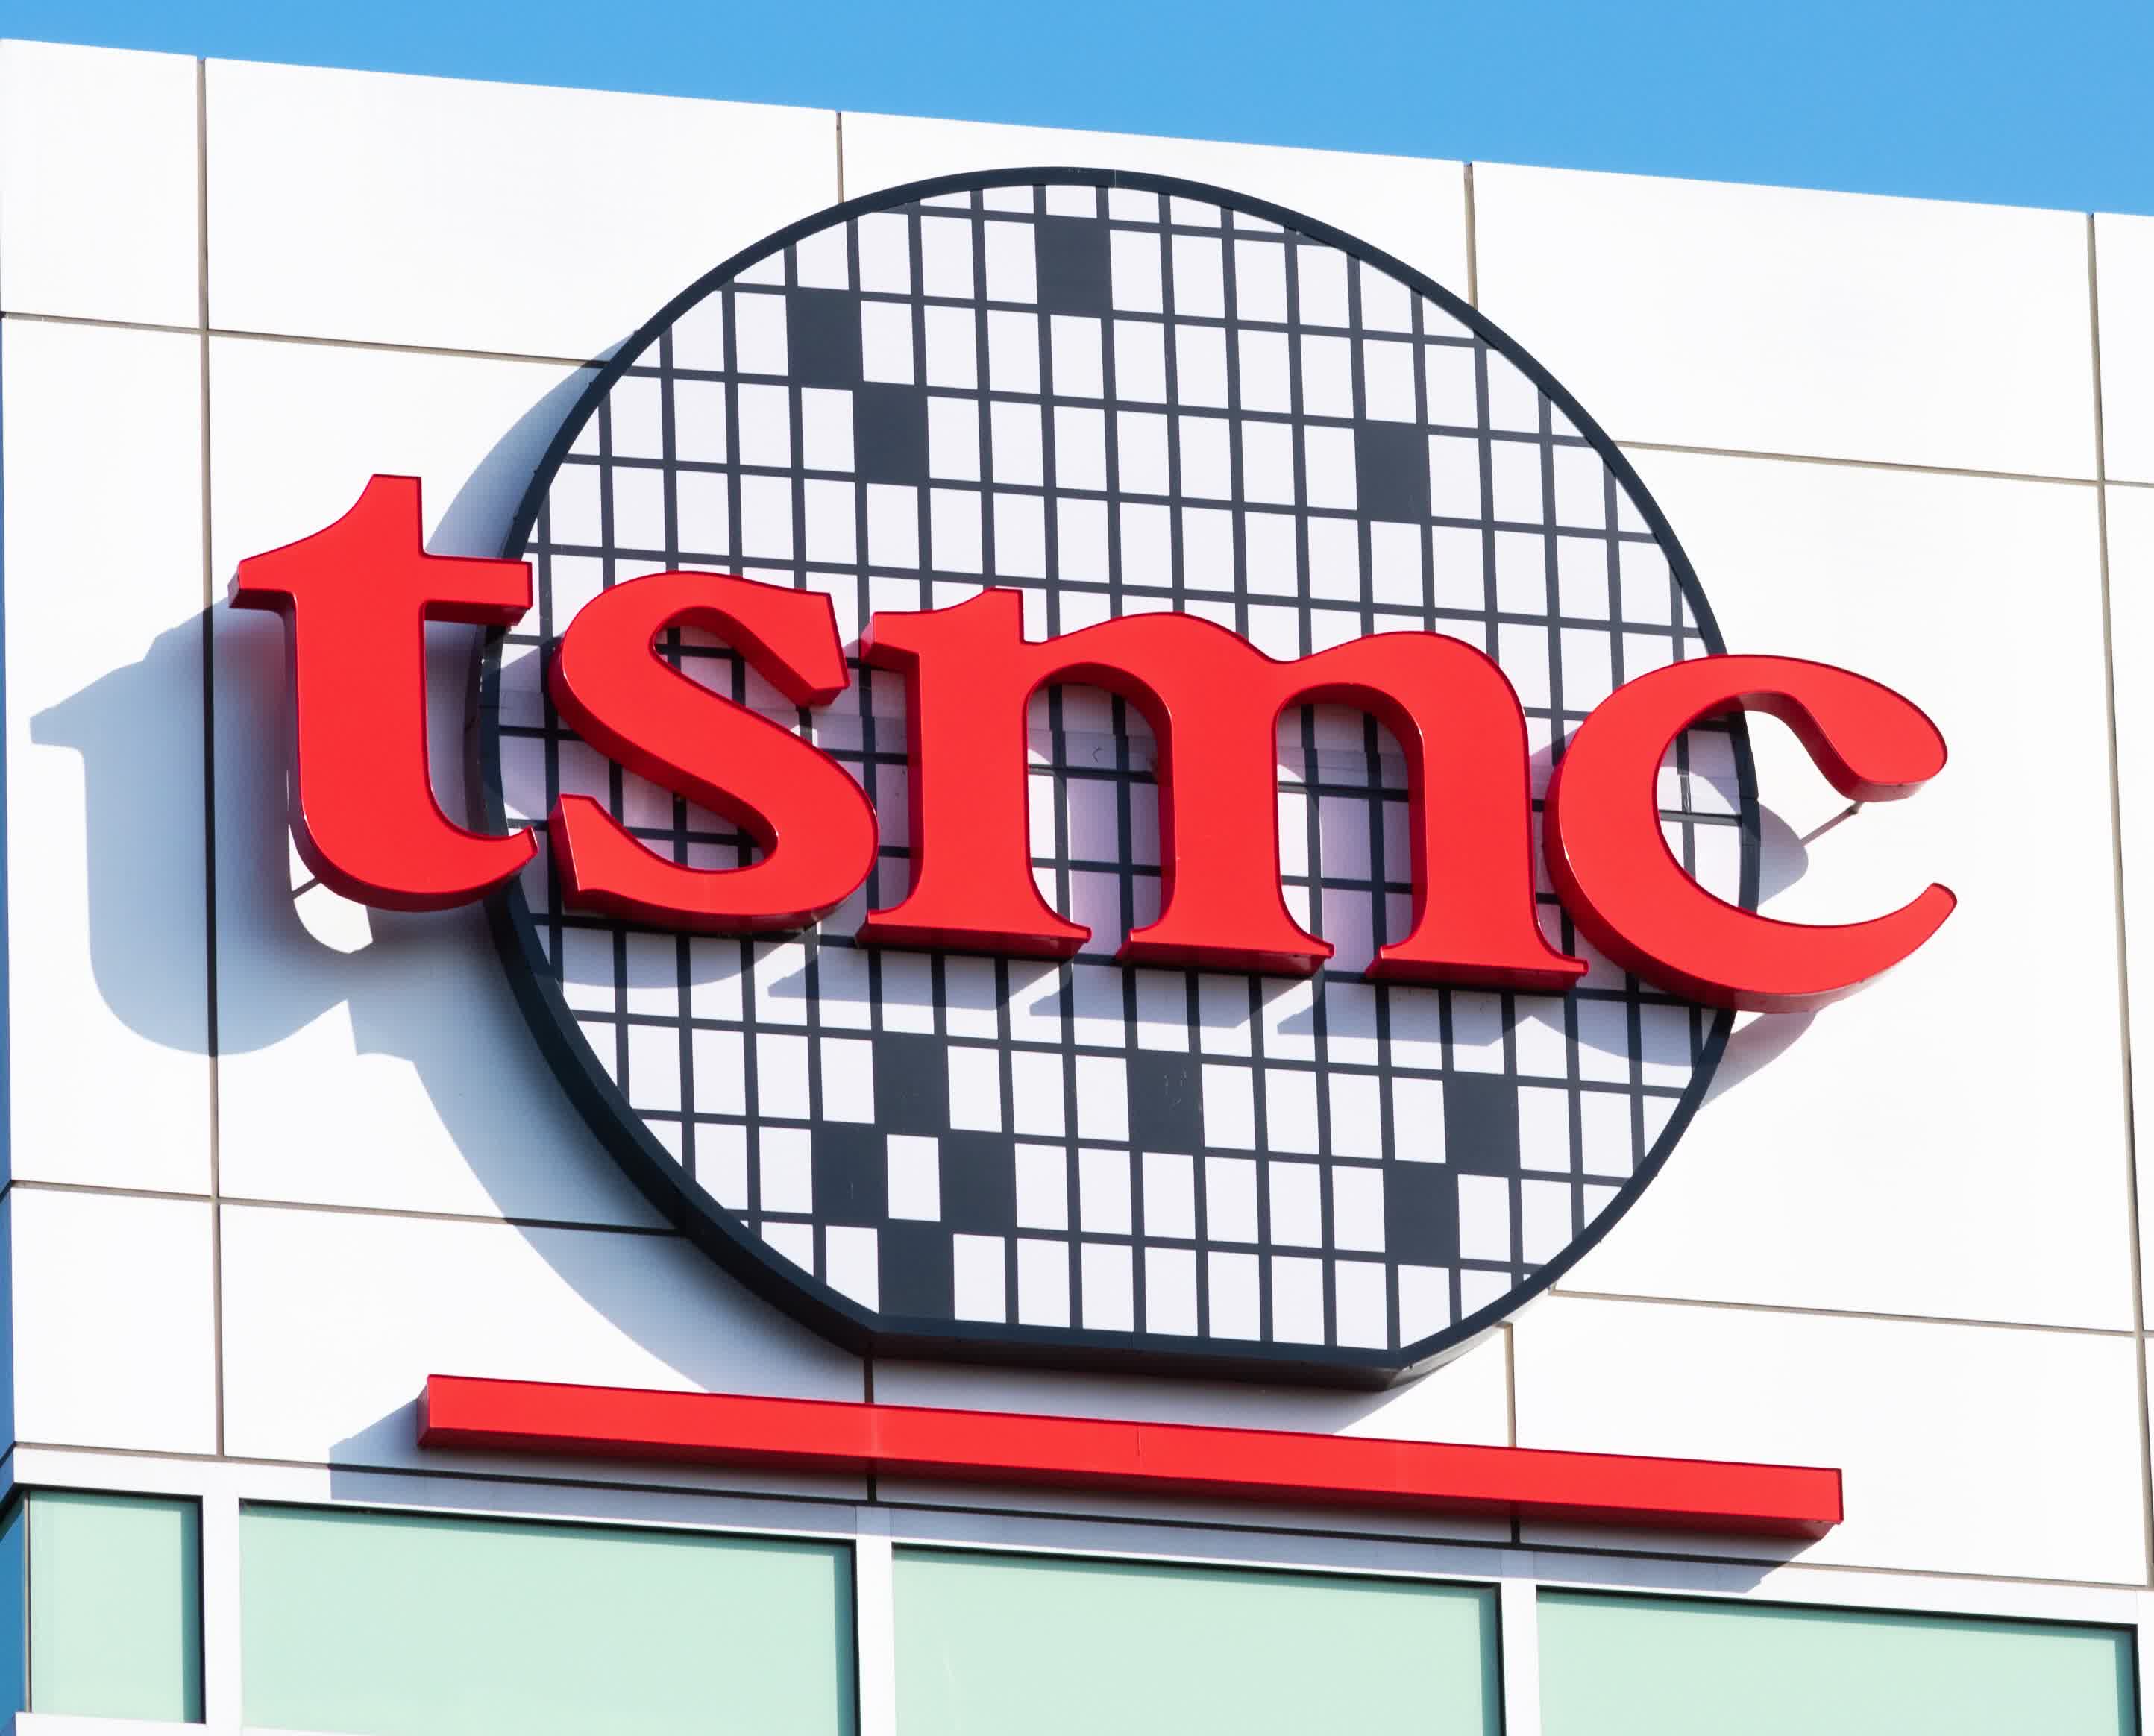 Waning consumer demand sees TSMC miss revenue forecasts for first time in two years